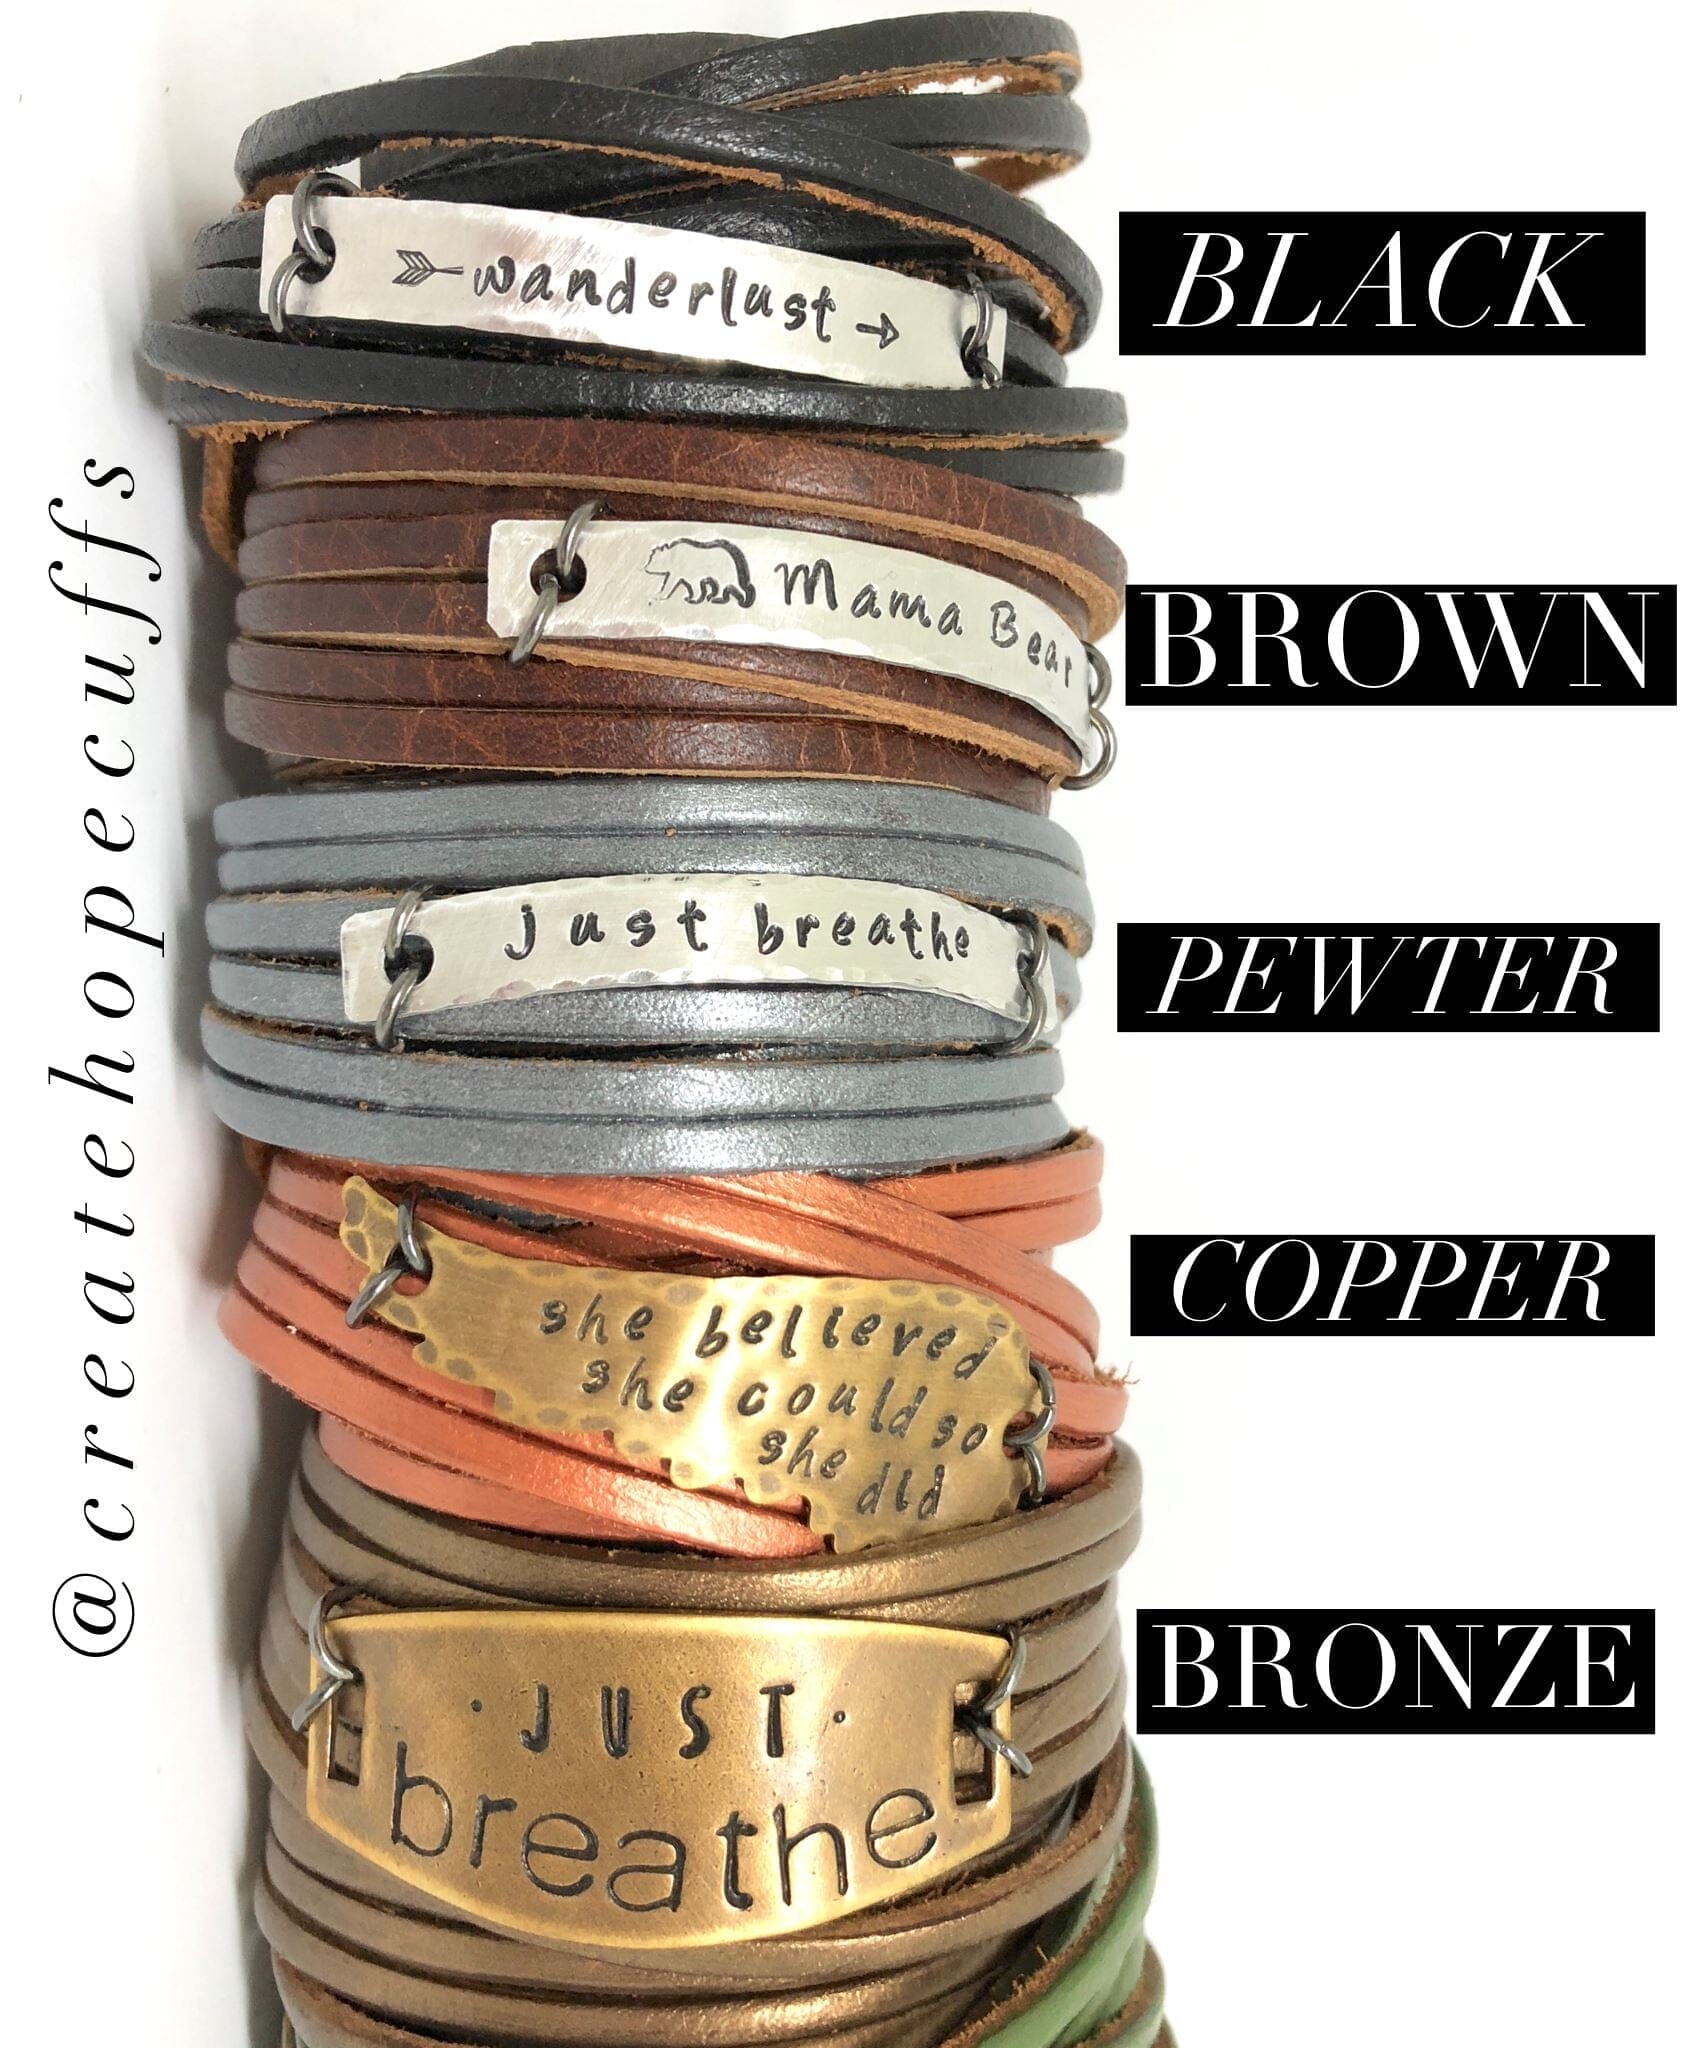 2024 WORD OF THE YEAR Double Wrap Leather Bracelet | Personalized | Adjustable Leather Wrap Create Hope Cuffs 